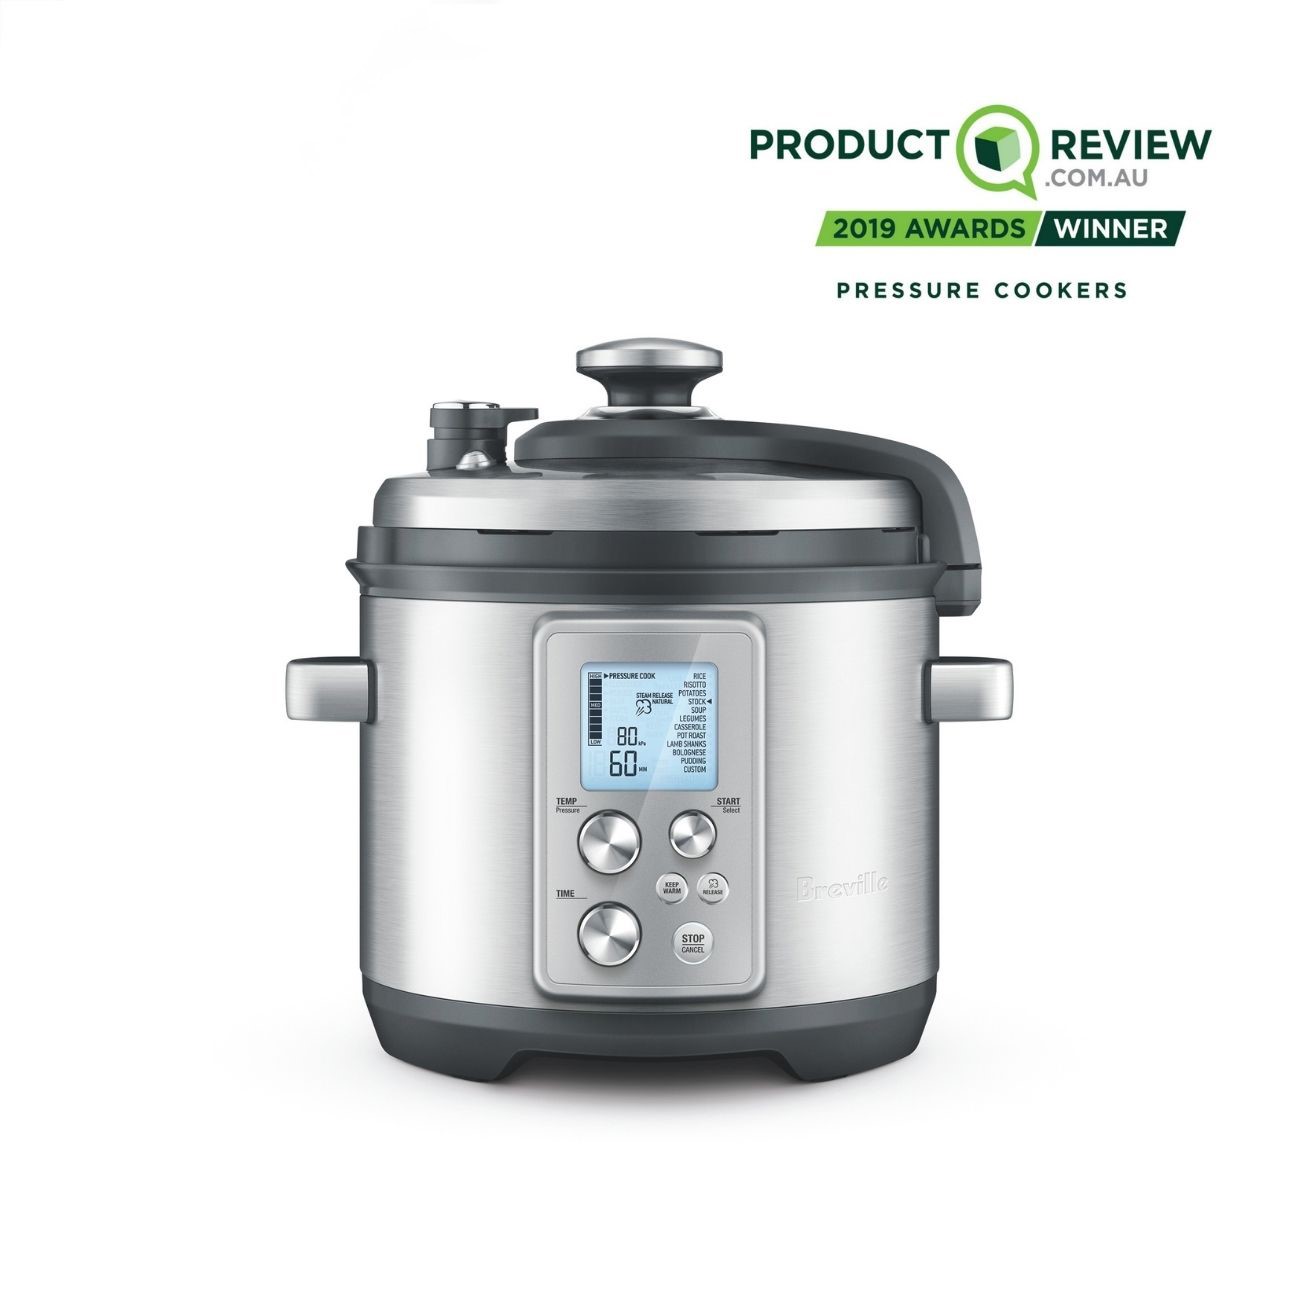 The Fast Slow Cooker Breville